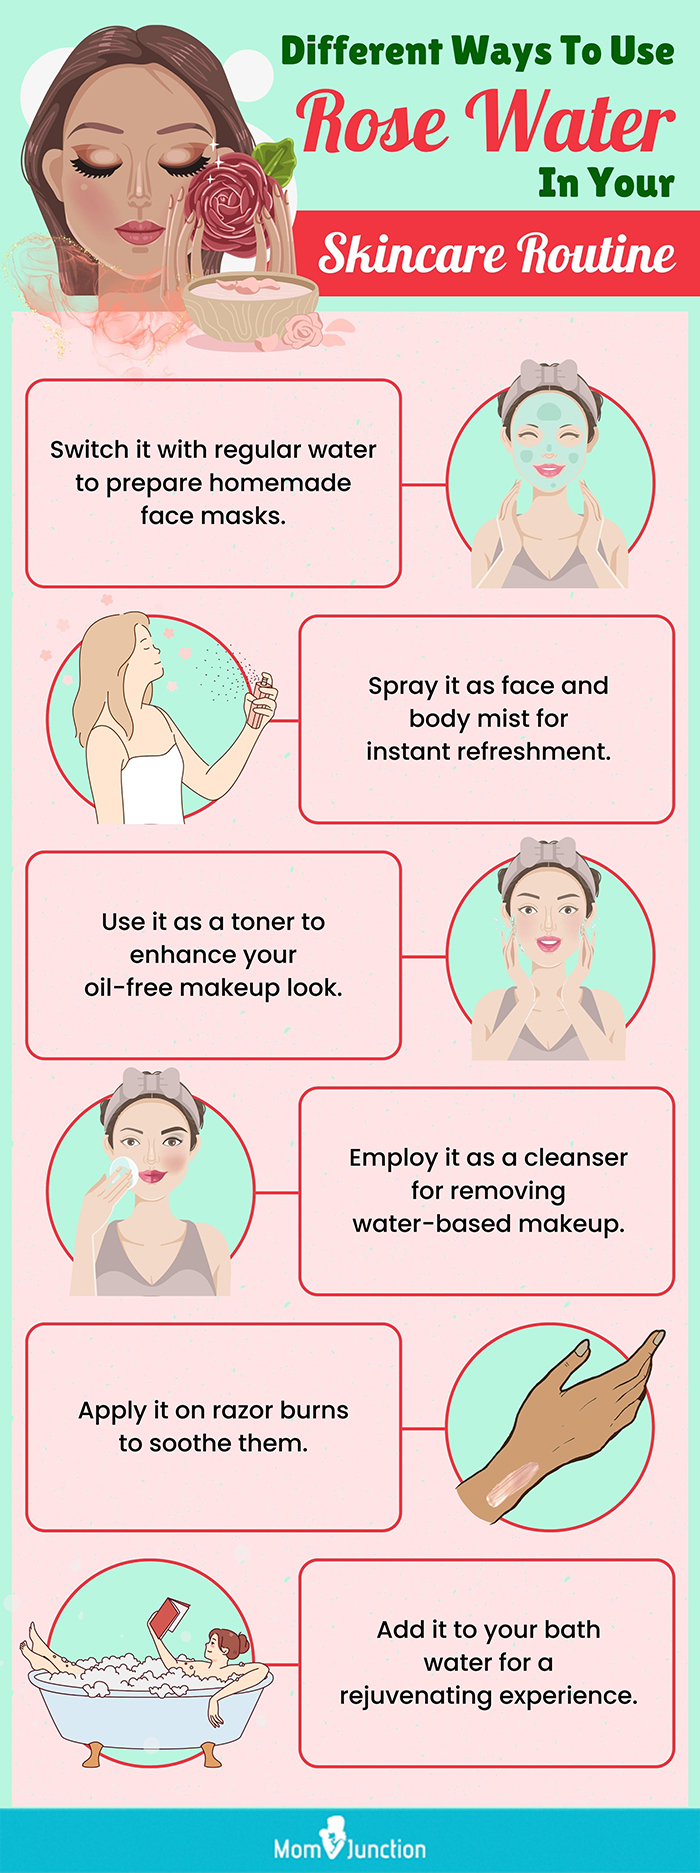 Different Ways To Use Rose Water In Your Skincare Routine (infographic)